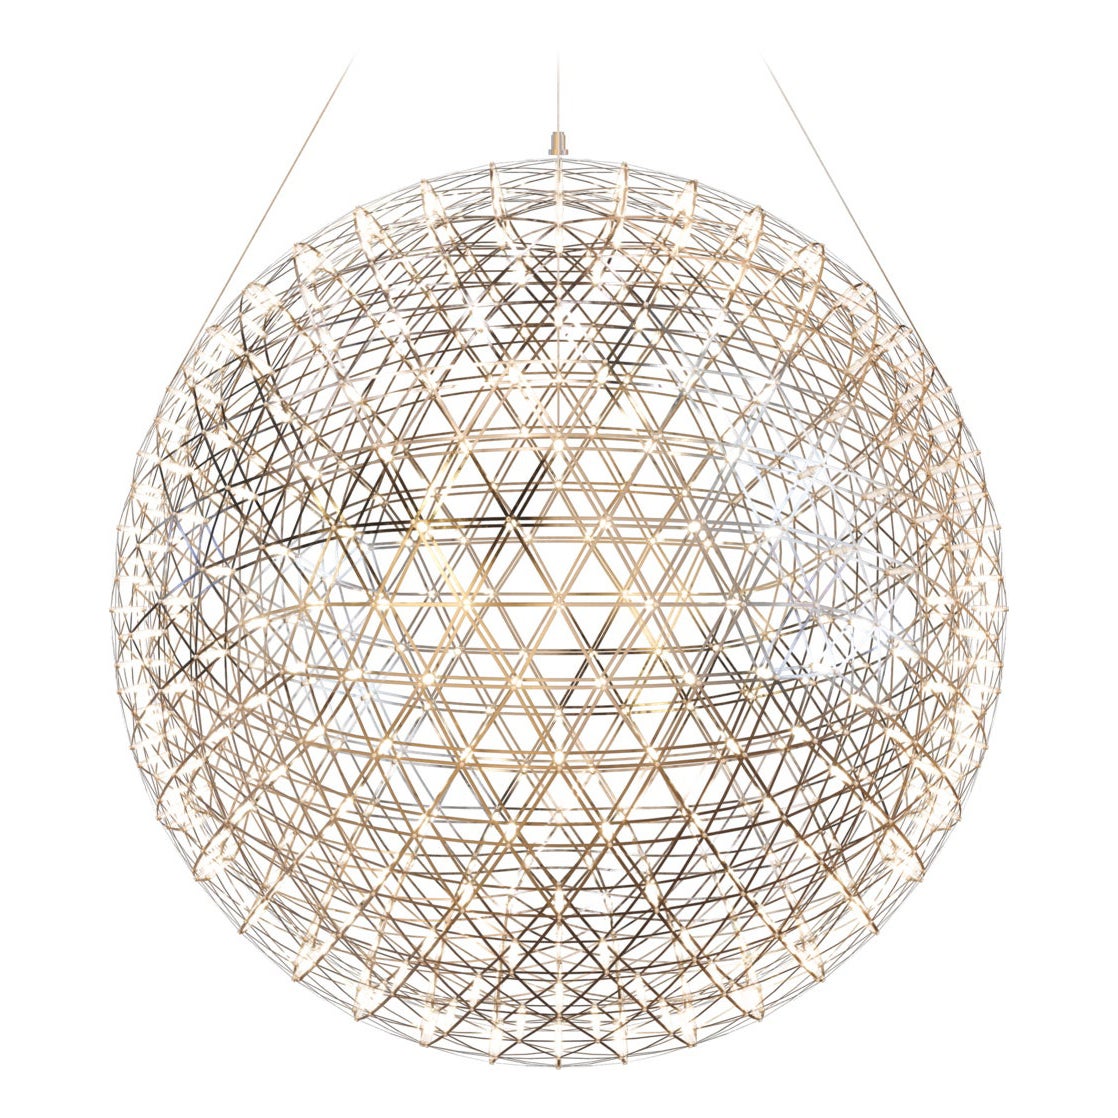 Moooi Raimond II R127 Suspension LED Lamp in Stainless Steel, 10m For Sale